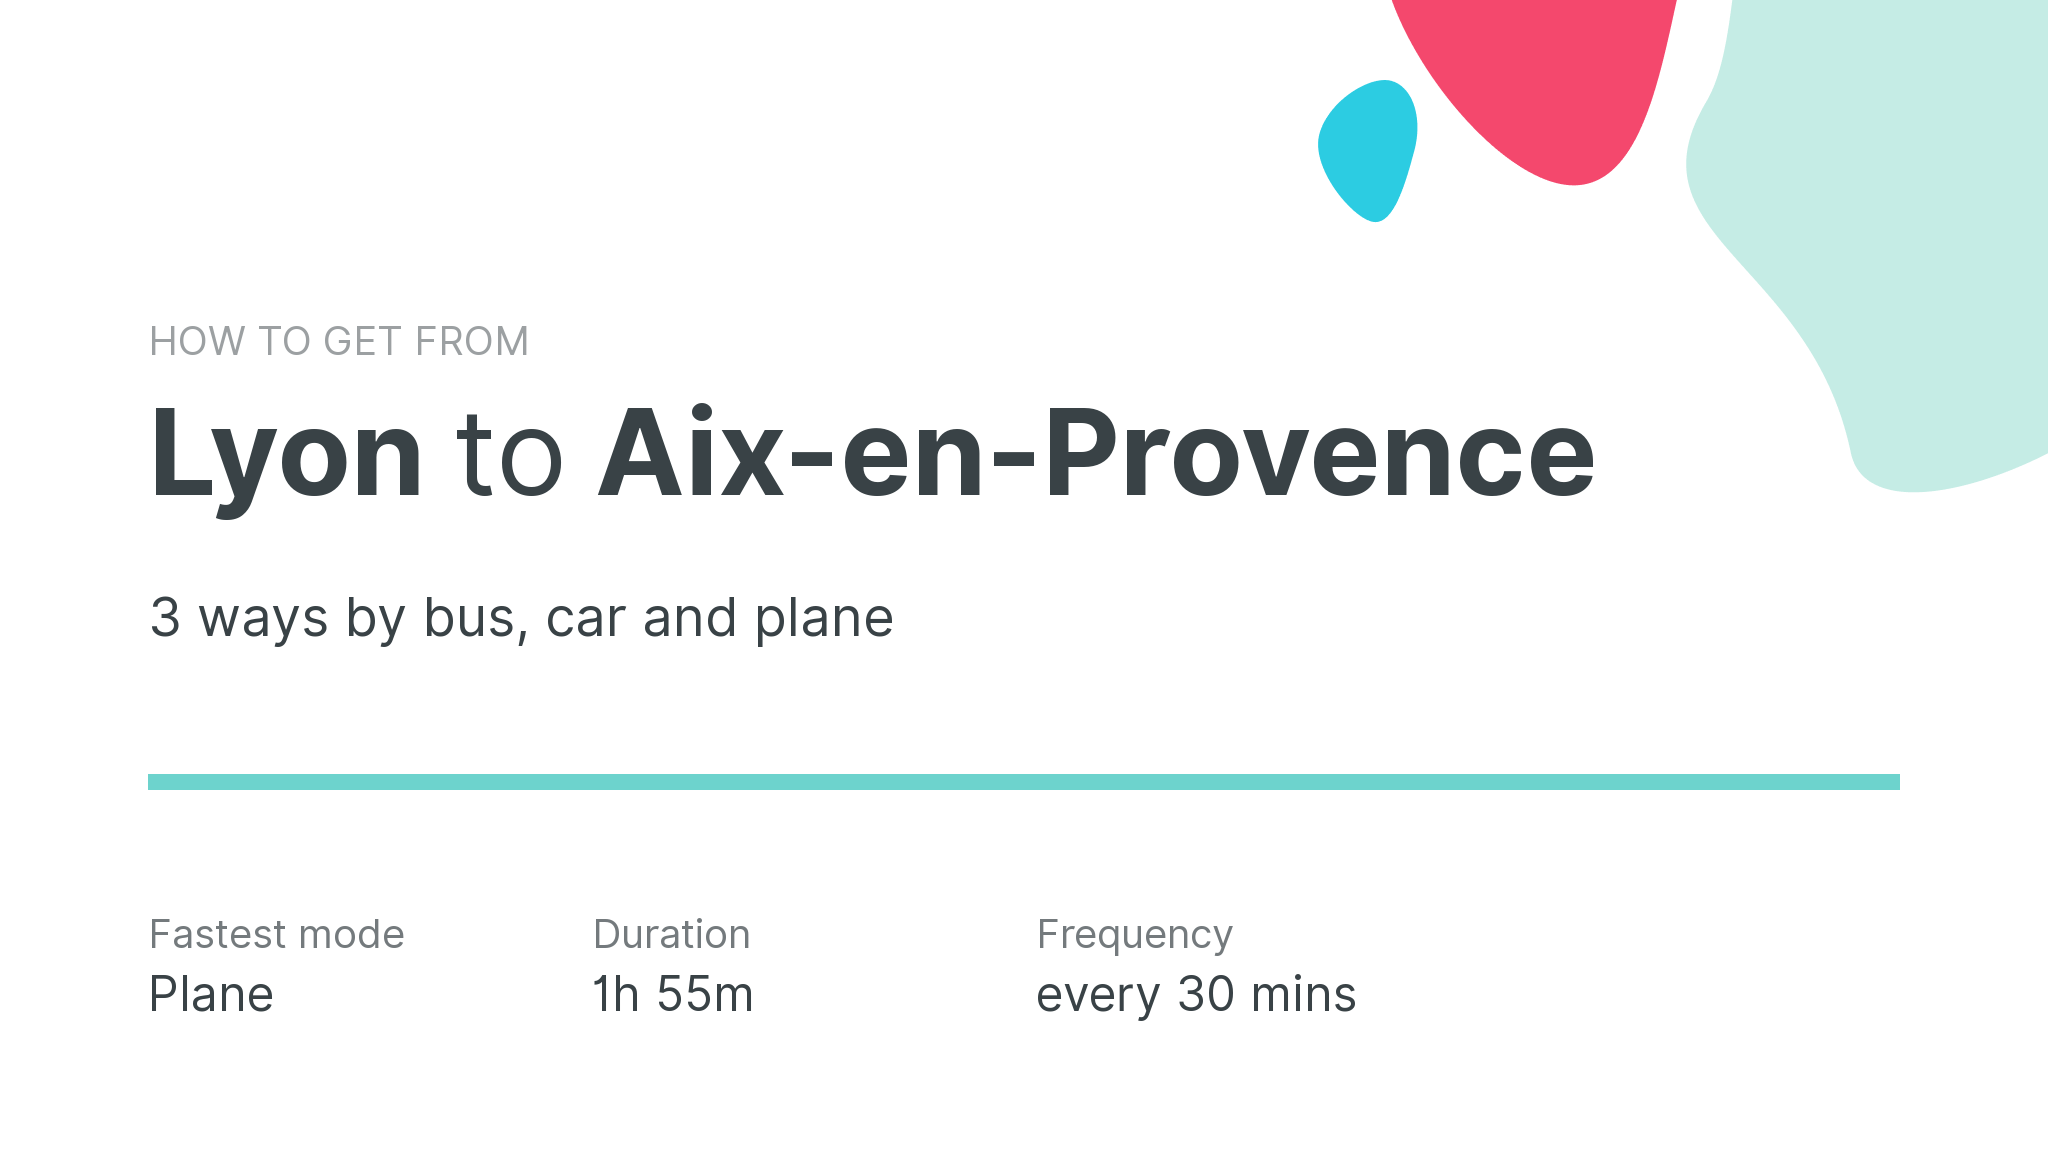 How do I get from Lyon to Aix-en-Provence